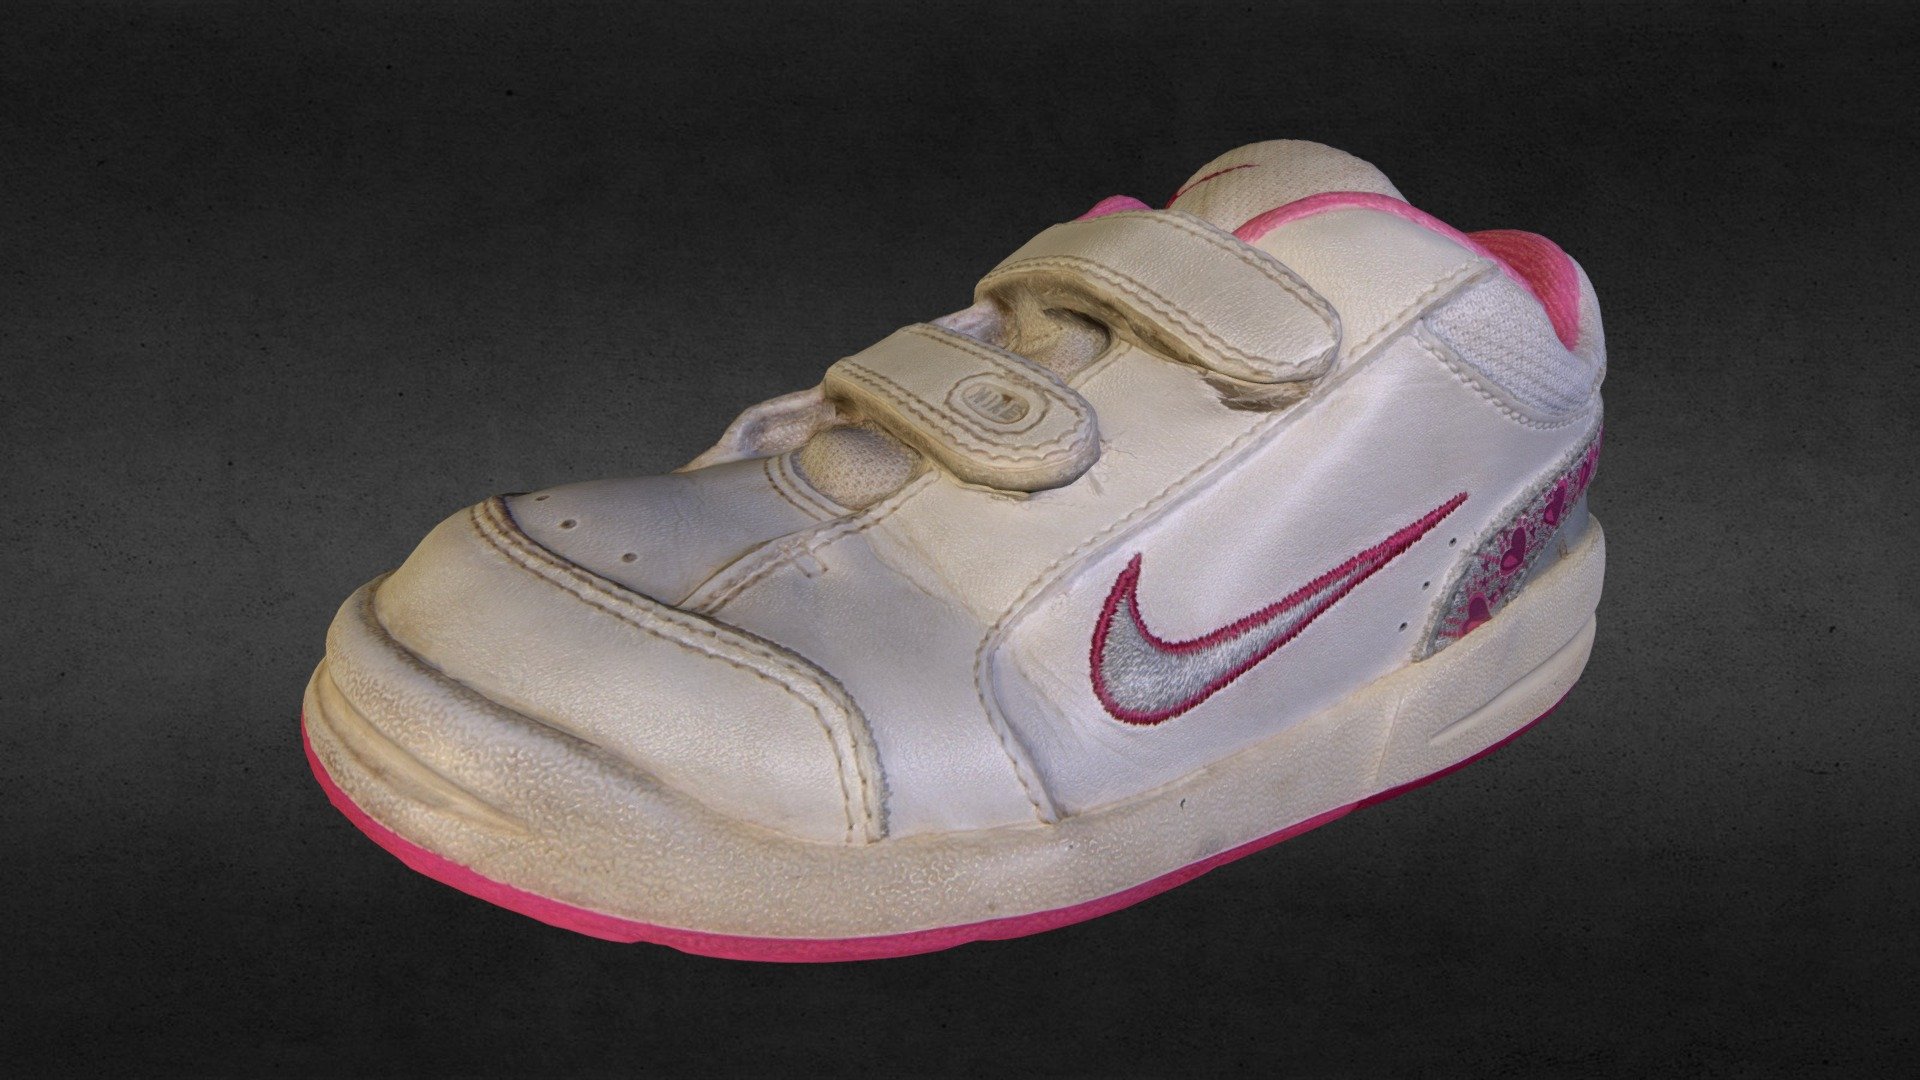 Used_Childrens_Shoe_NIKE_3D_Photogrammetry